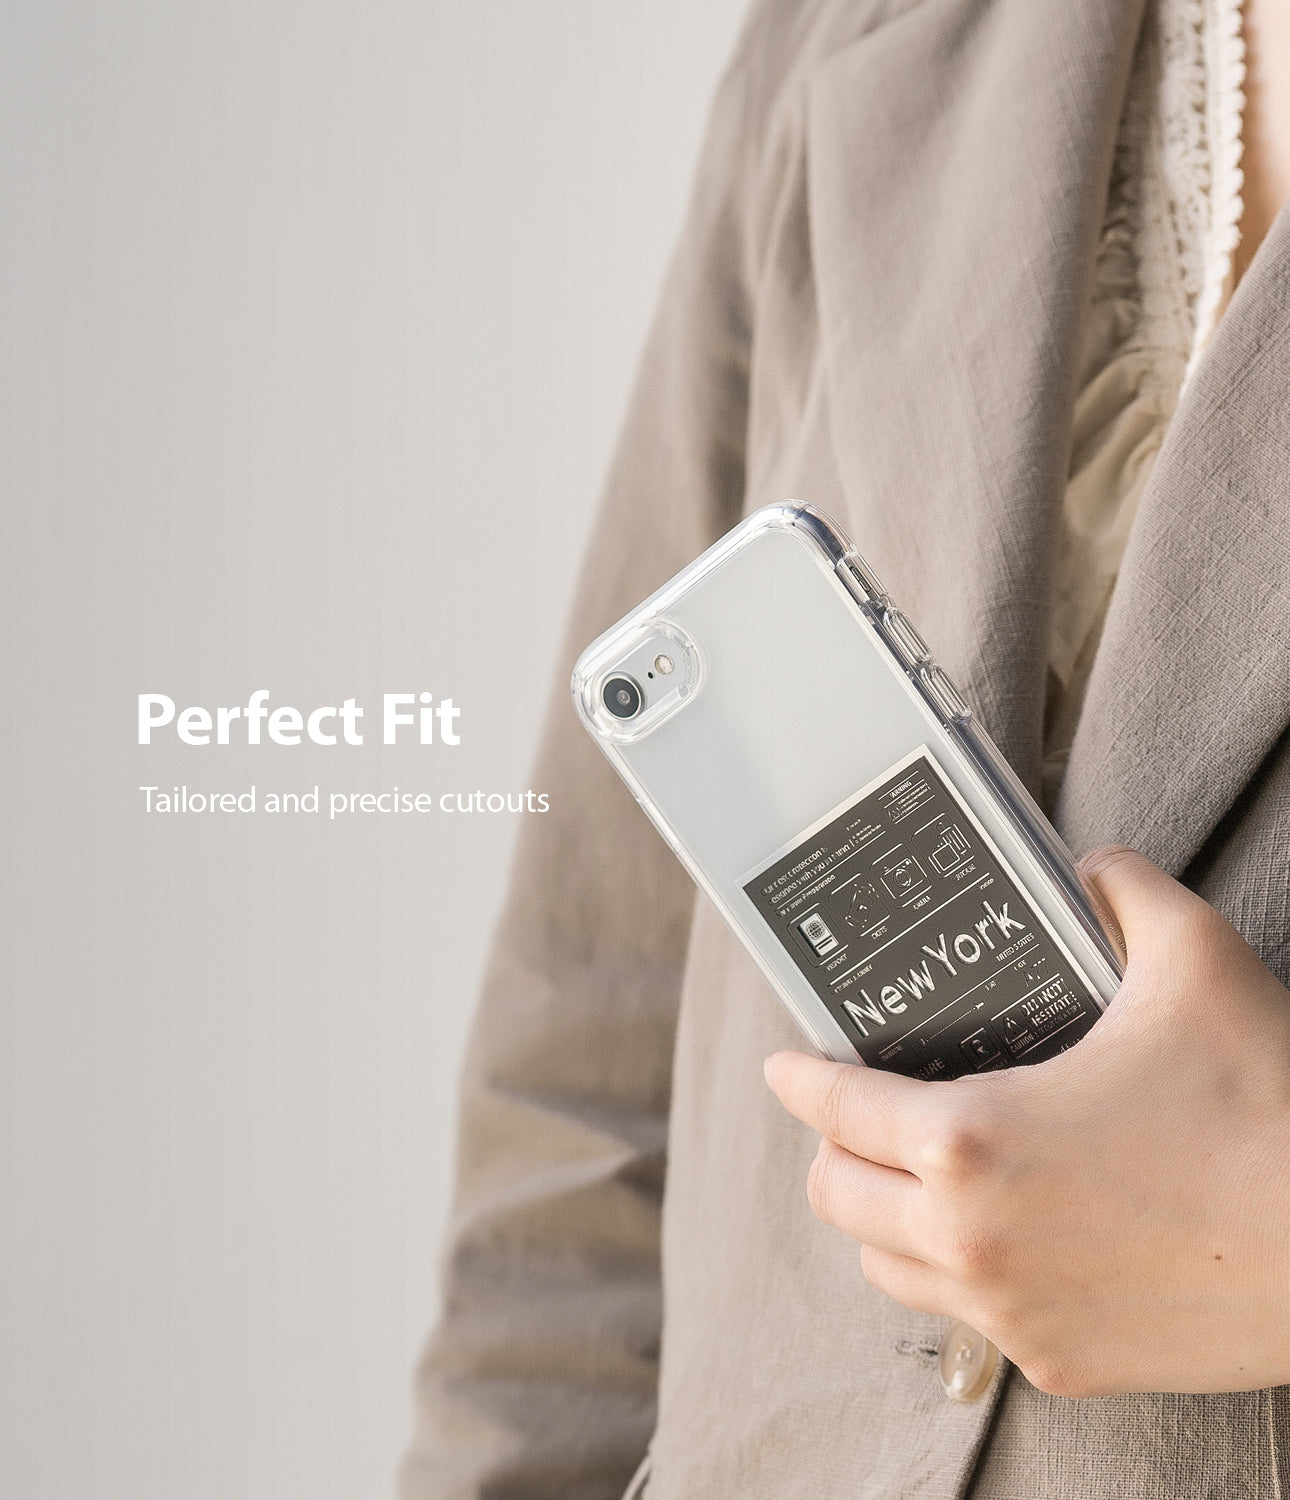 perfect fit - tailored and precise cutouts